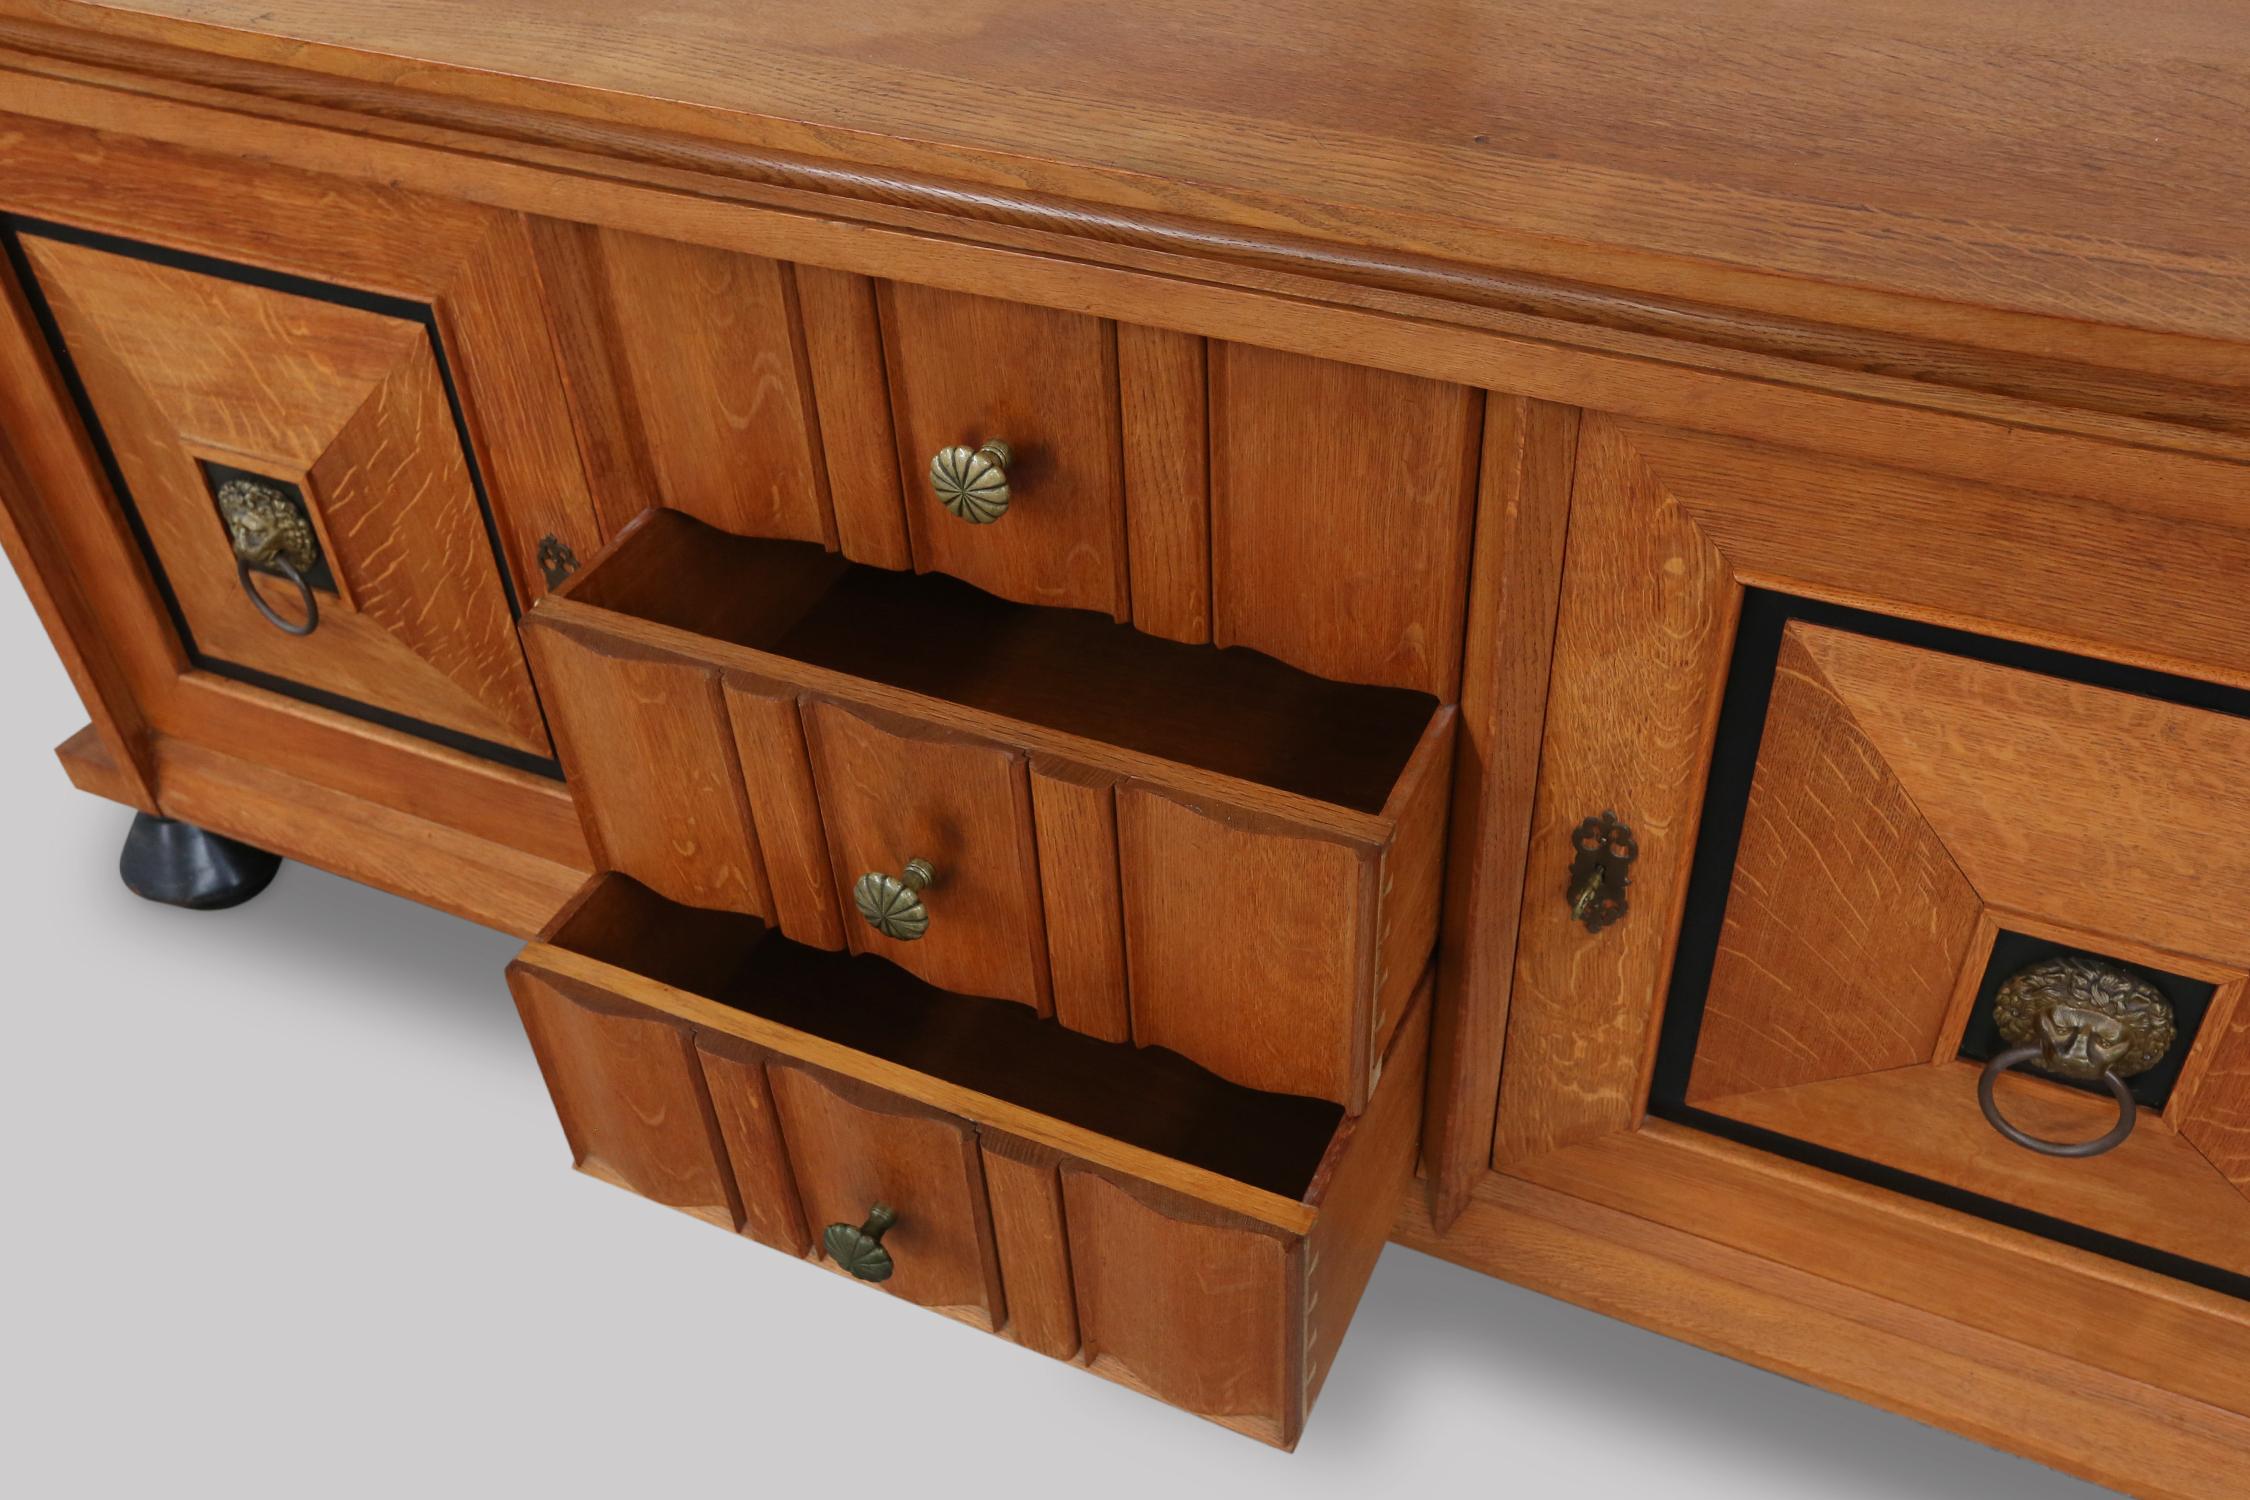 Belgian Late Art Deco Sideboard in Solid Oak and Brass Details For Sale 11